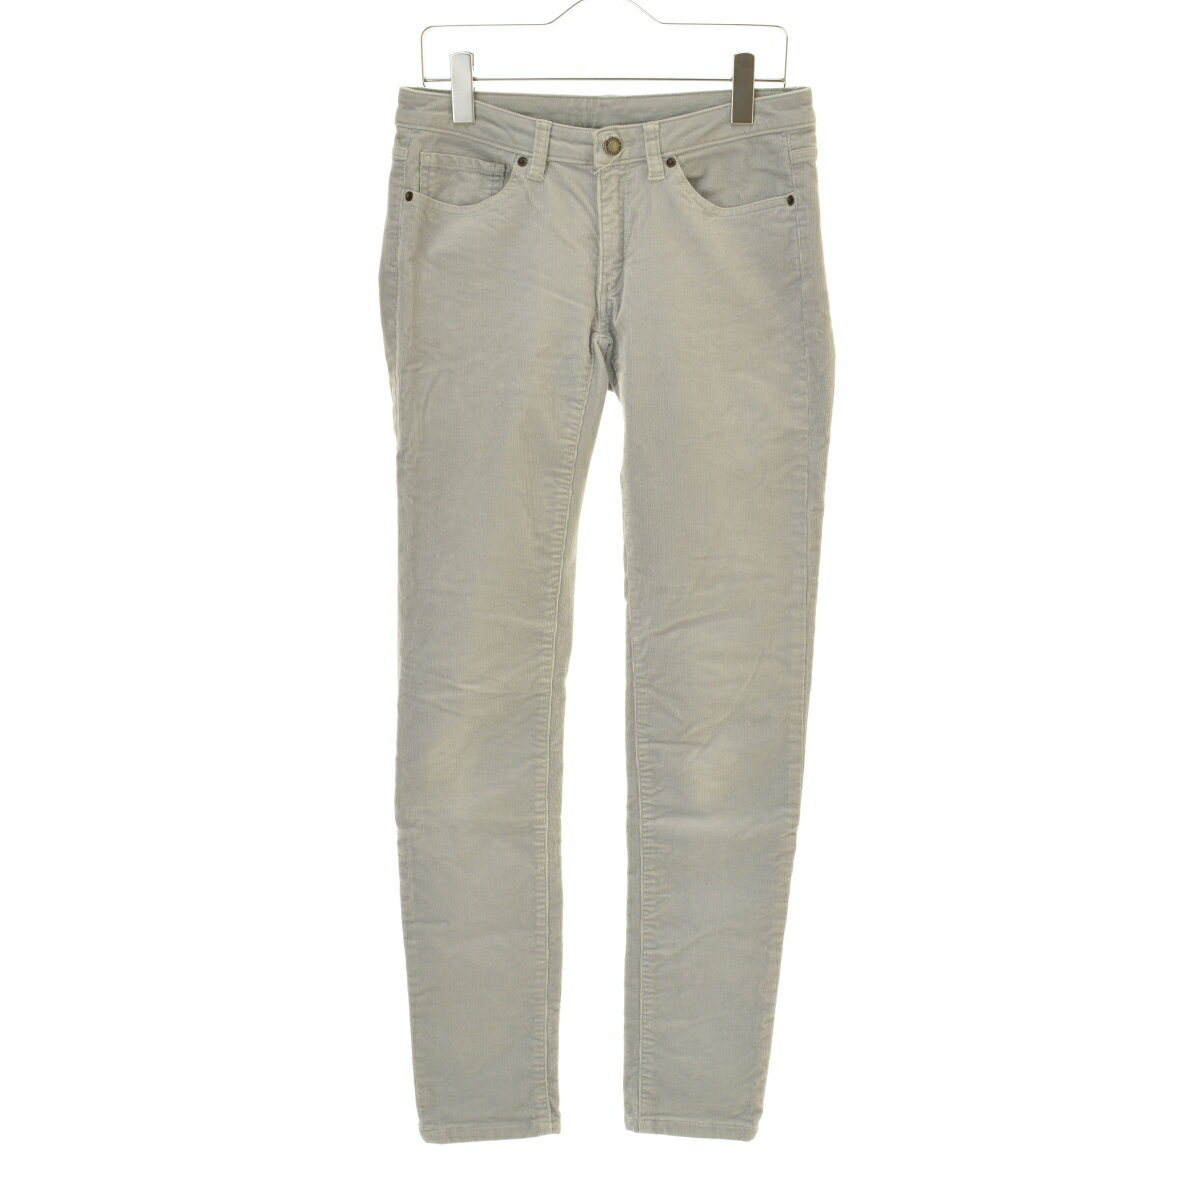 yÁzyԌlzPATAGONIA / p^SjA55055 Fitted Corduroy Pants tBbehR[fCpcycaceadbh-lz